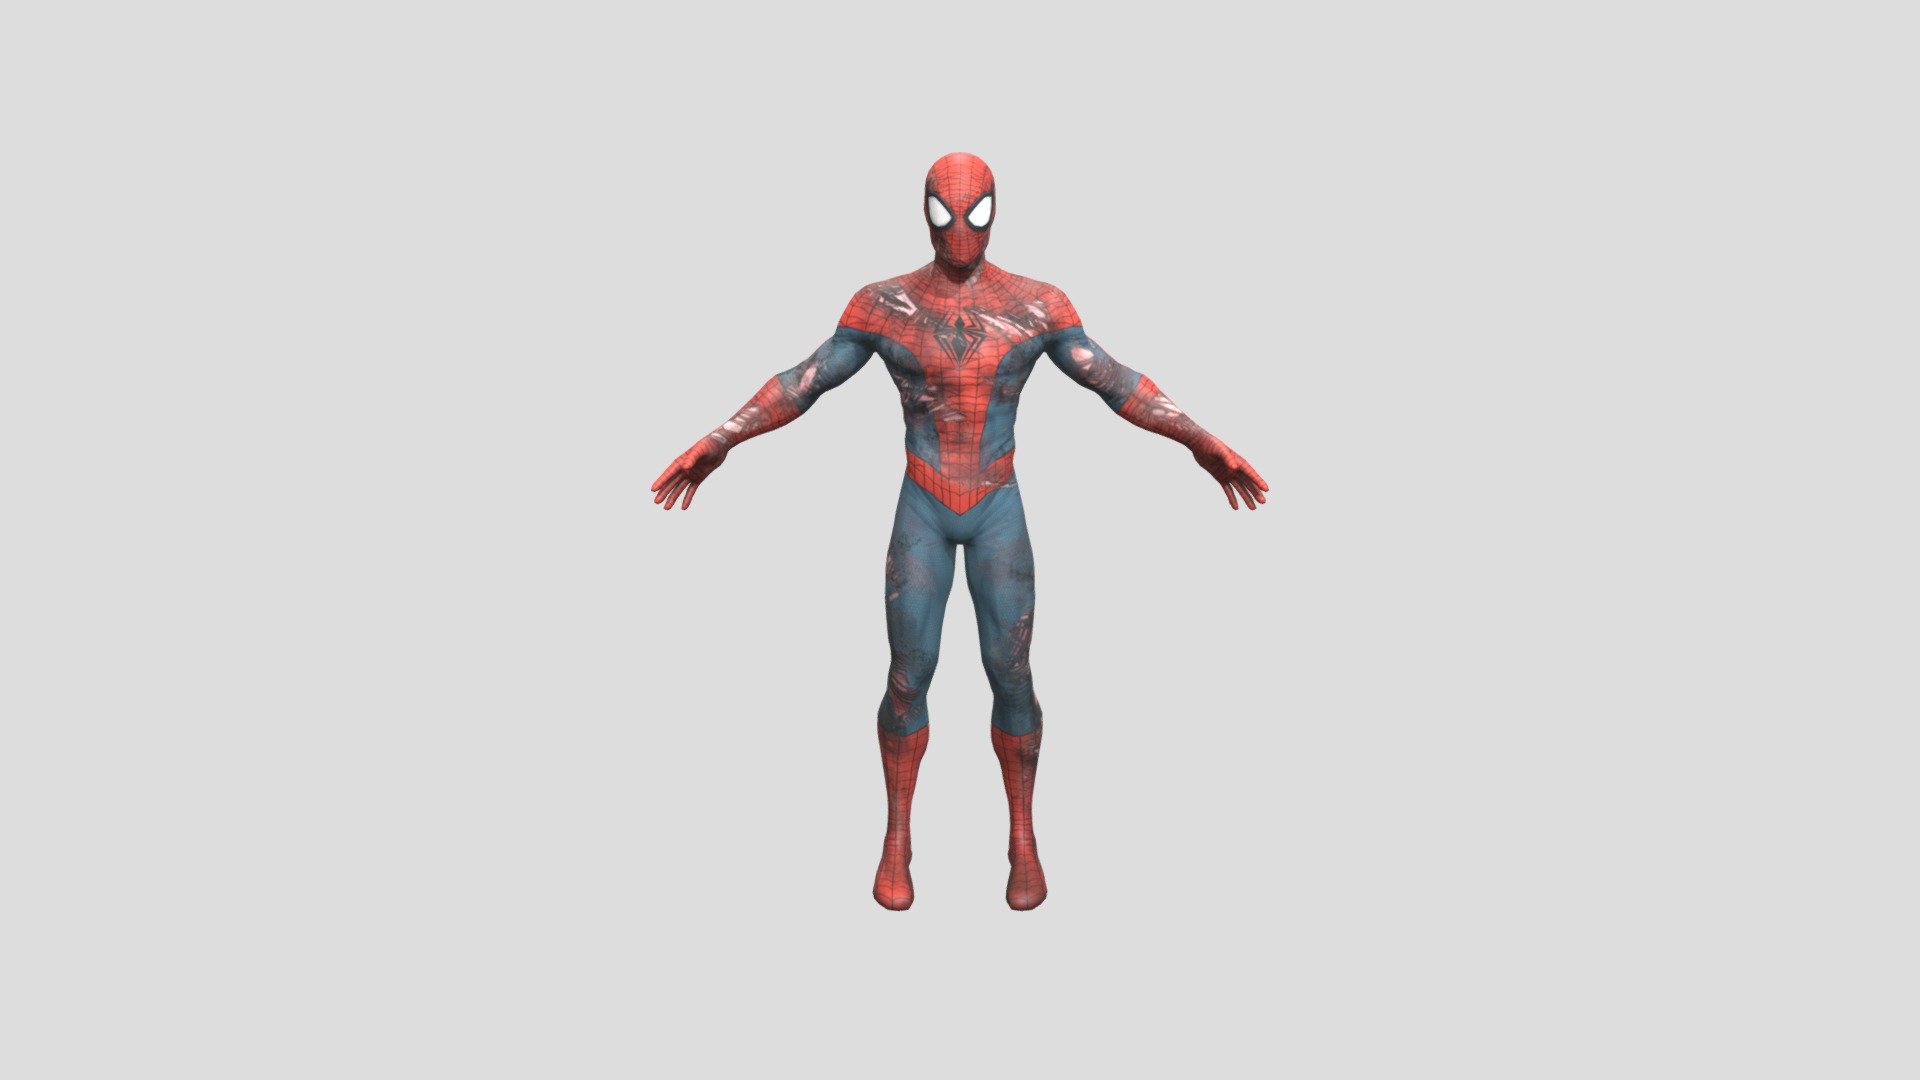 spider-man-edge-of-time-model-download-free-3d-model-by-m36-mecasonicegg-6a1fee4-sketchfab